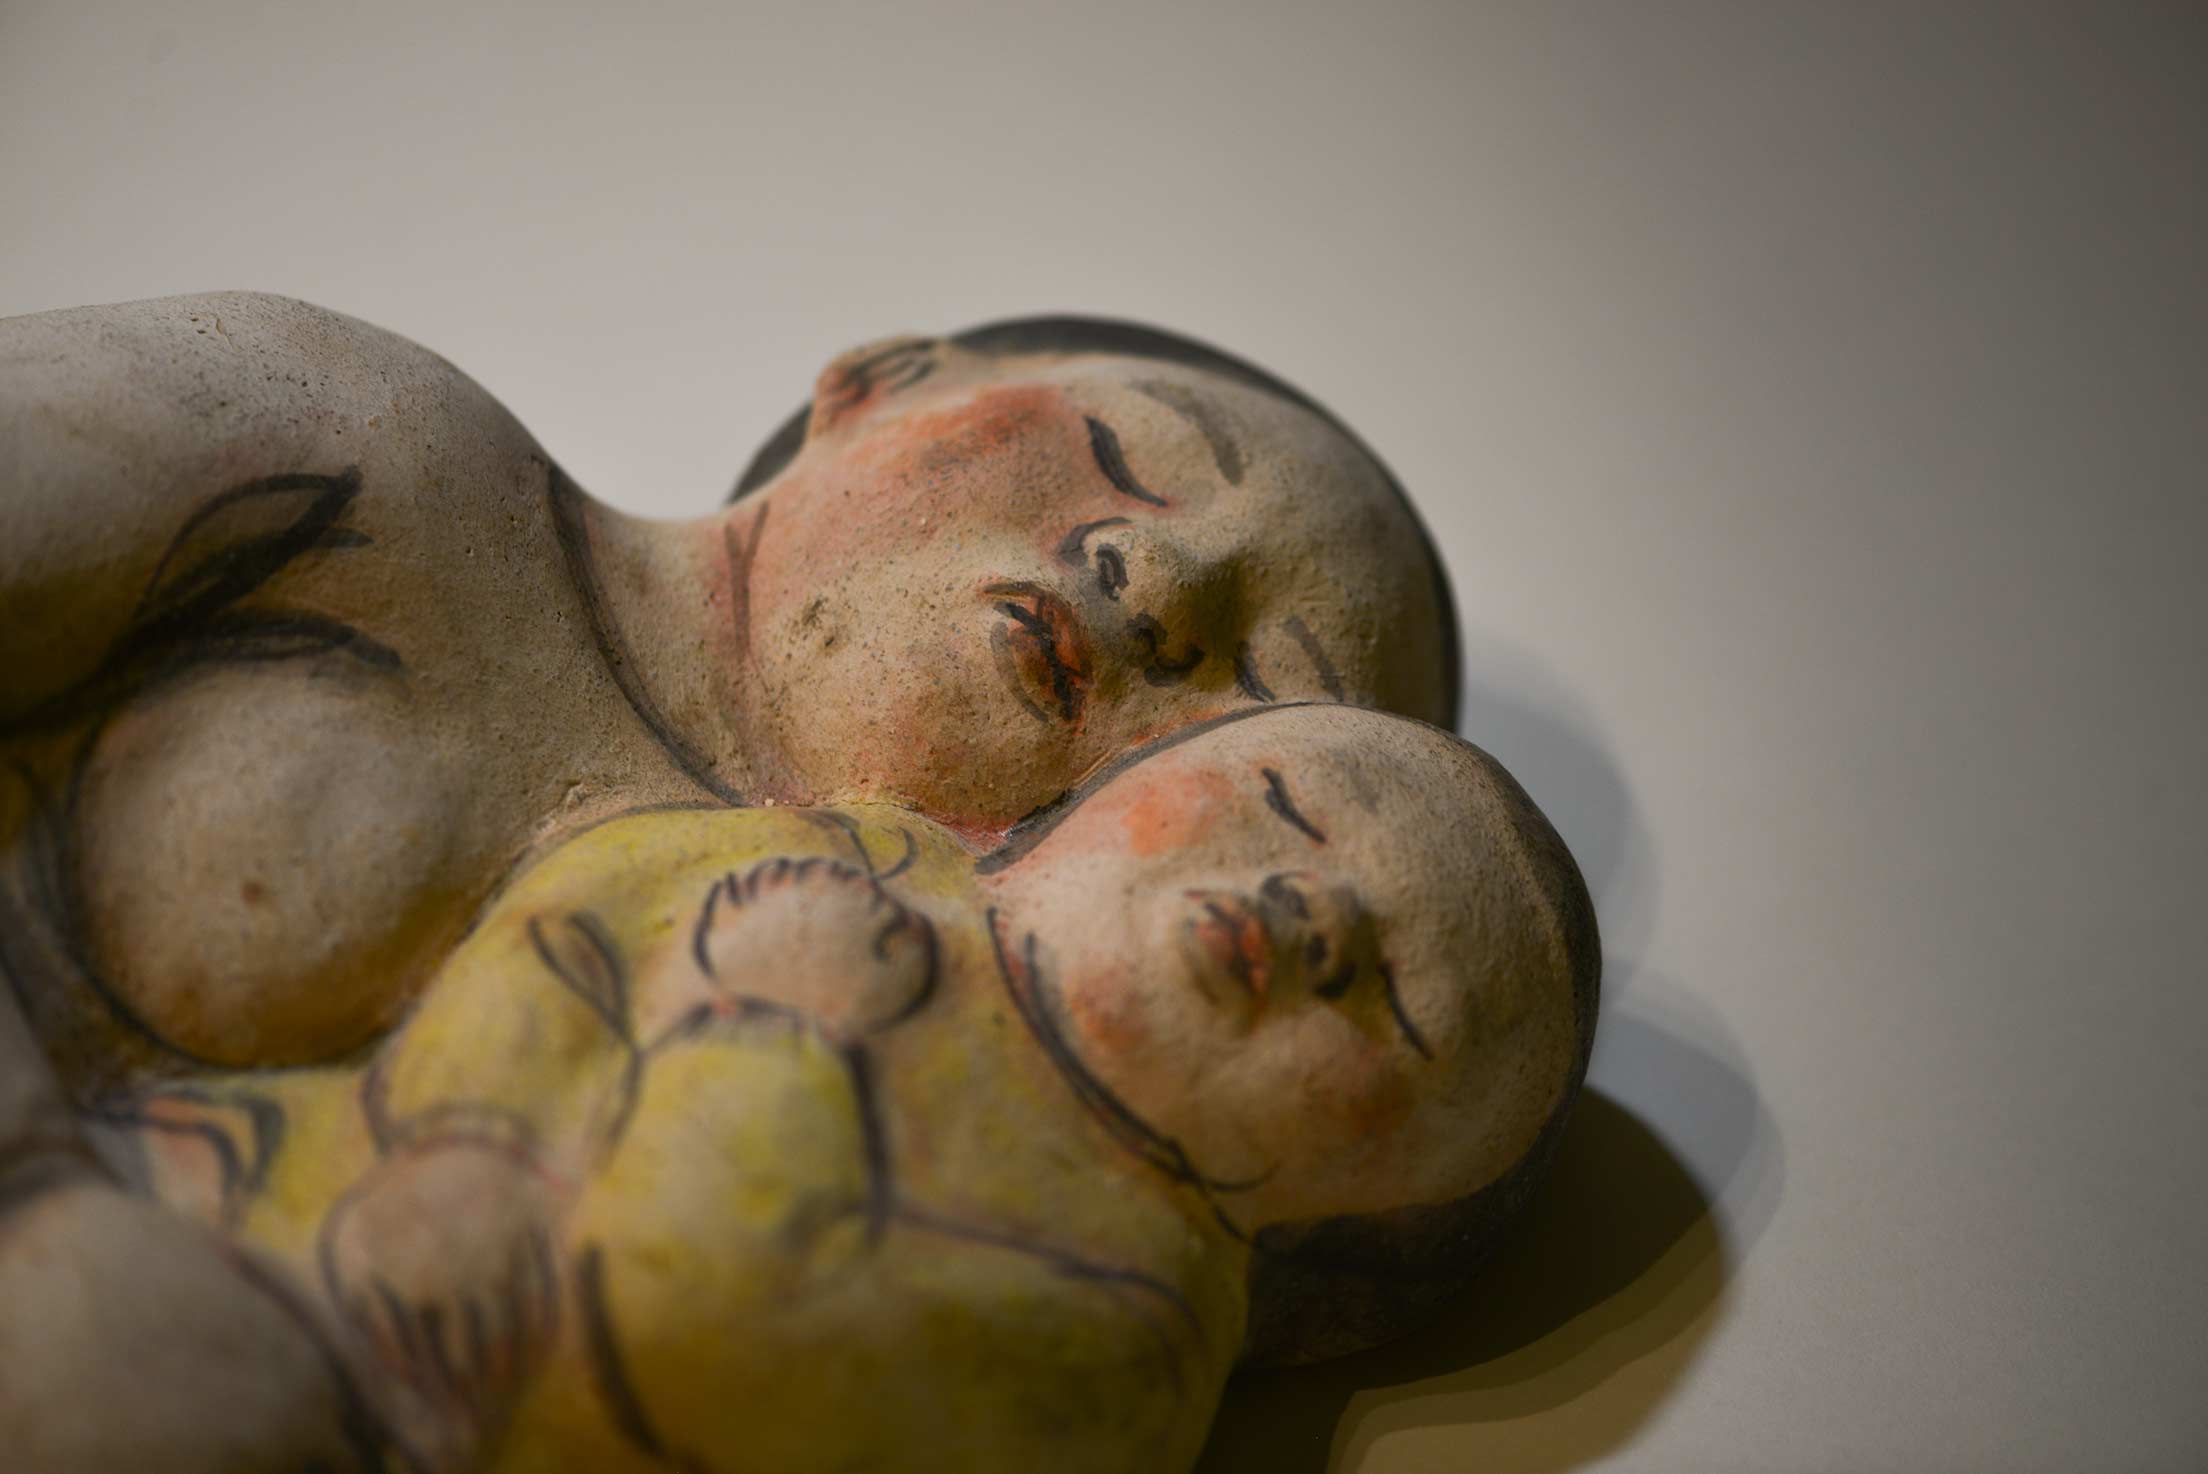 Sculpture of mother and baby from Candice B Groot's Collection